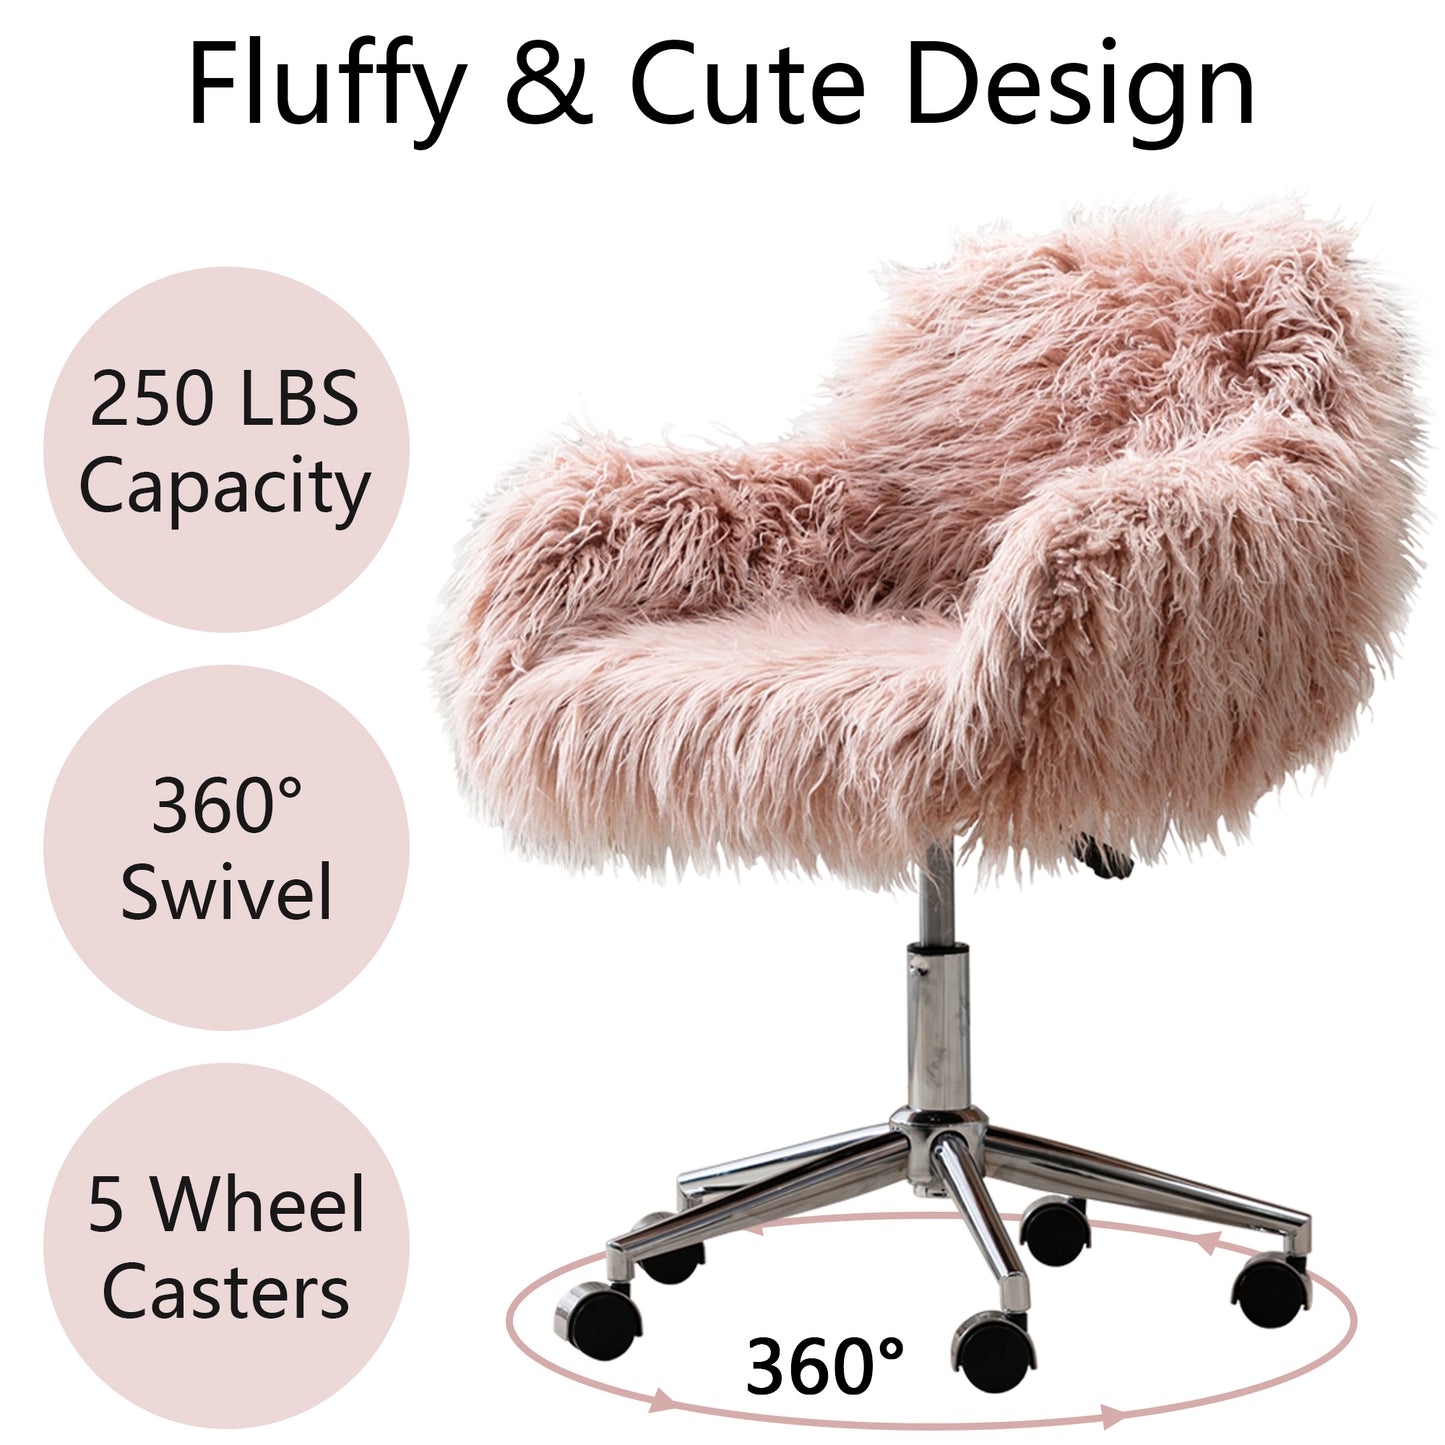 Faux Fur Desk Chair, Cute Fluffy Upholstered Padded Seat, Vanity Accent Modern Height Adjustable Swivel Arm Decorative Furniture for Living Room, Makeup, Home Office, Teen Girls Bedroom, White